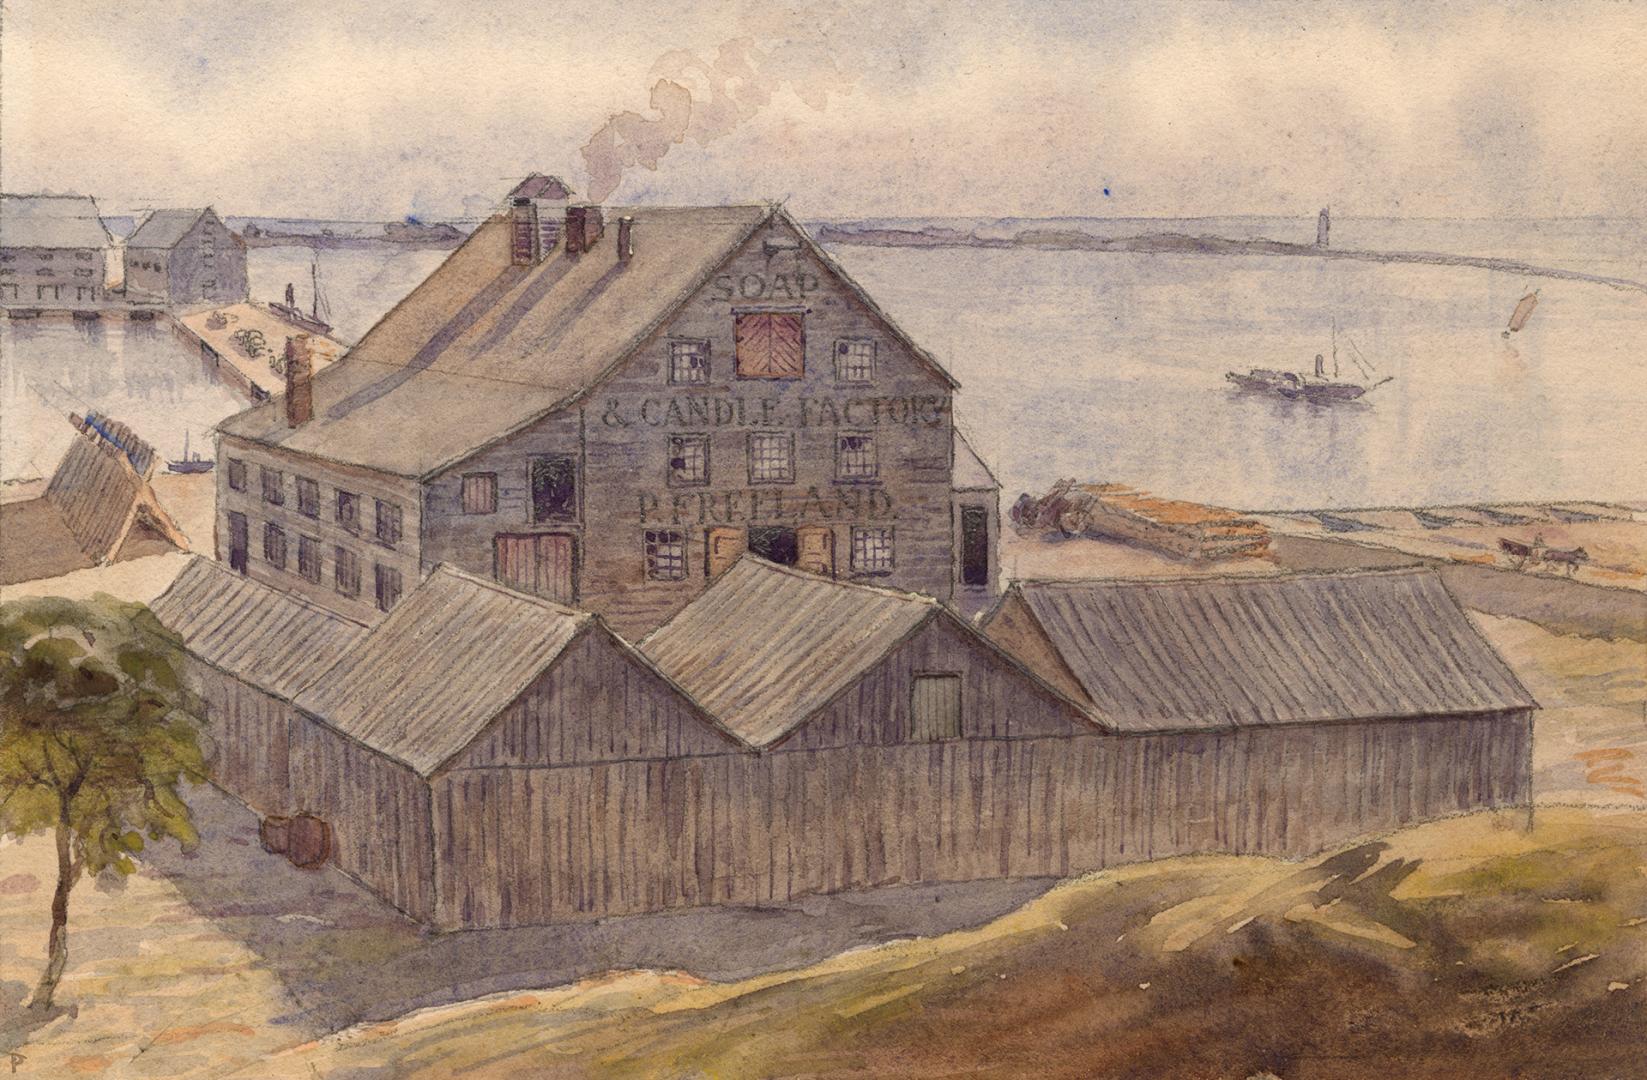 Image shows a few waterfront buildings with a sign "Soap & Candle Factory".